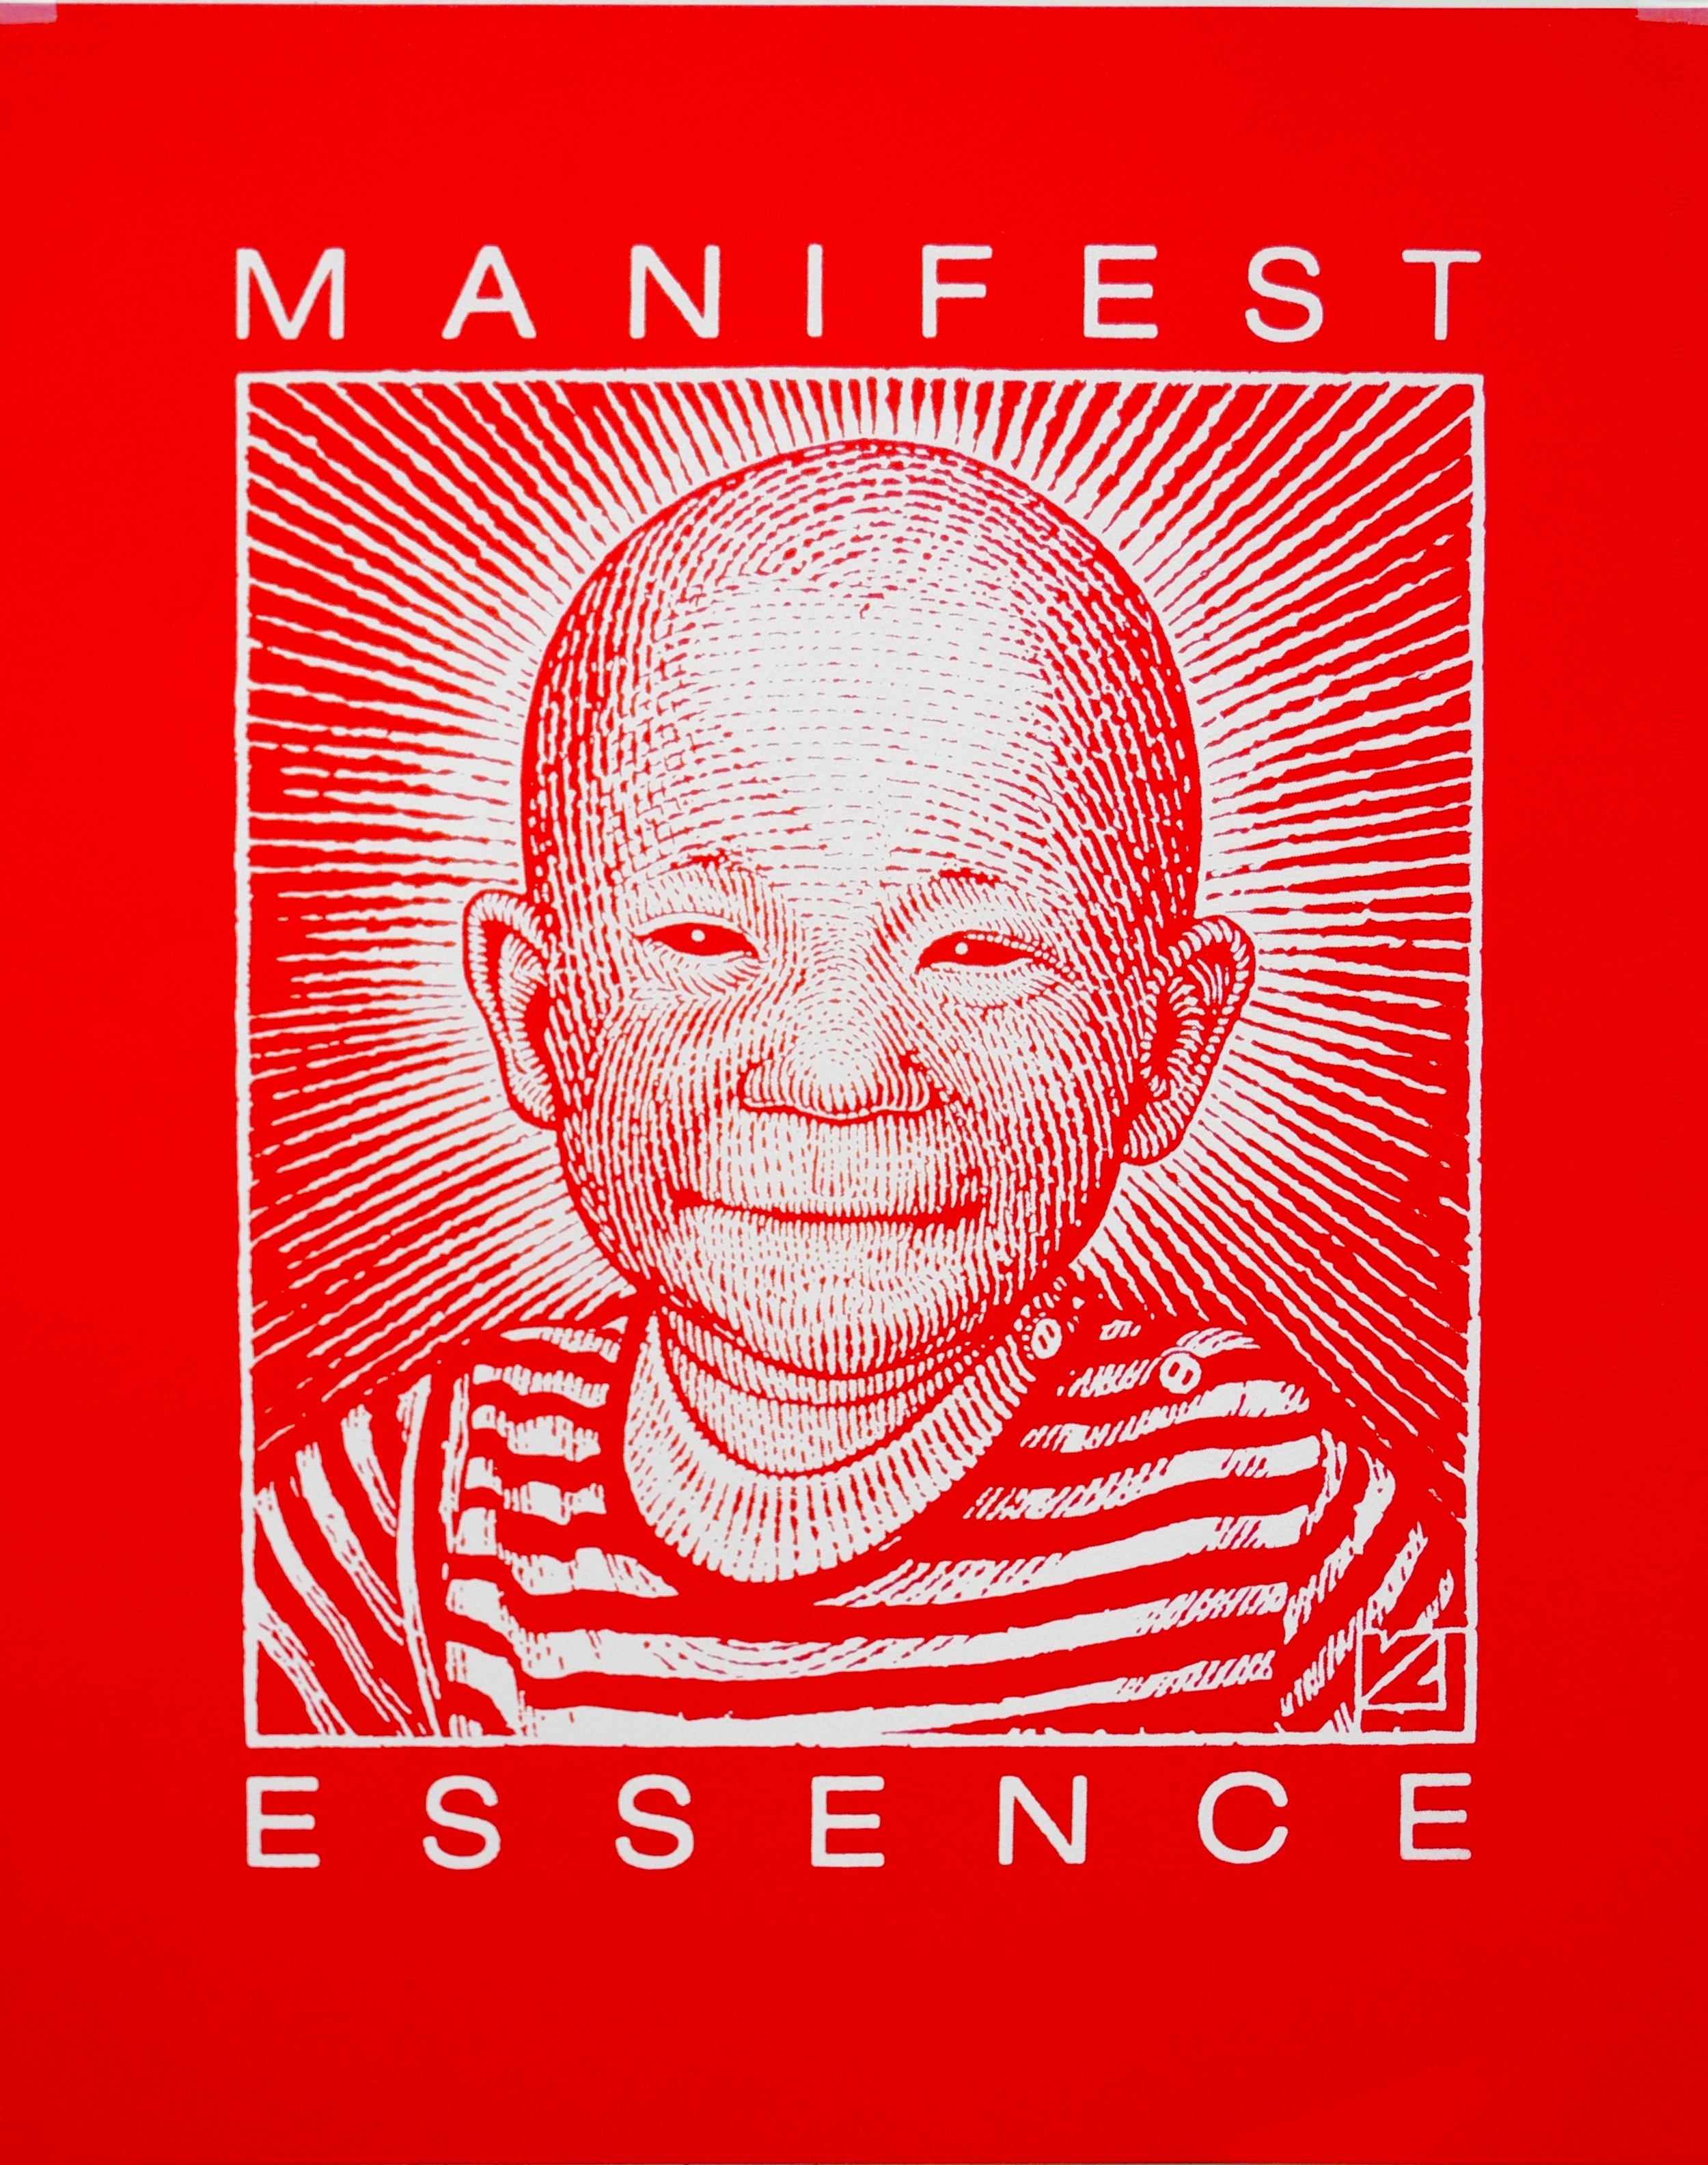 "Manifest Essence" by Vernon Courtlandt Johnson. © 1993 VCJ. All rights reserved.